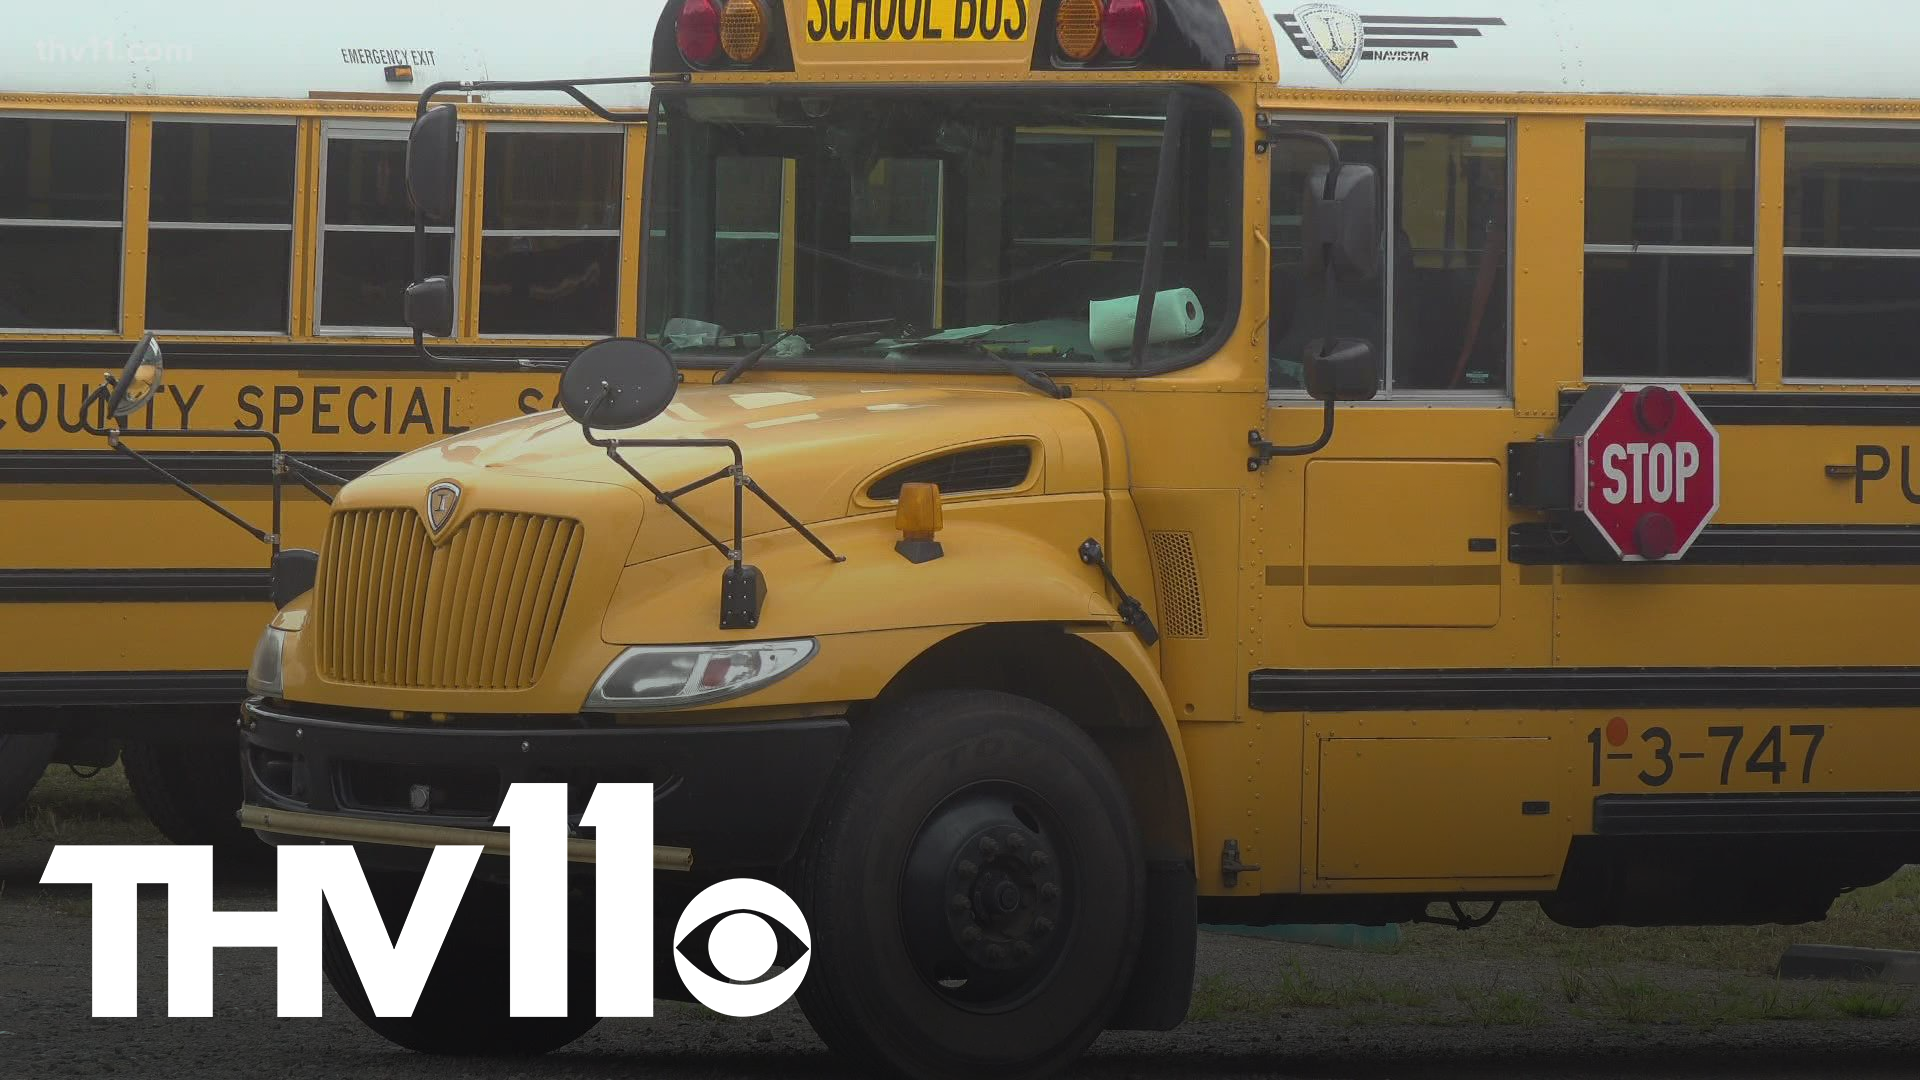 School districts across the state are facing a tough time finding qualified people to drive school buses as the new school year begins.